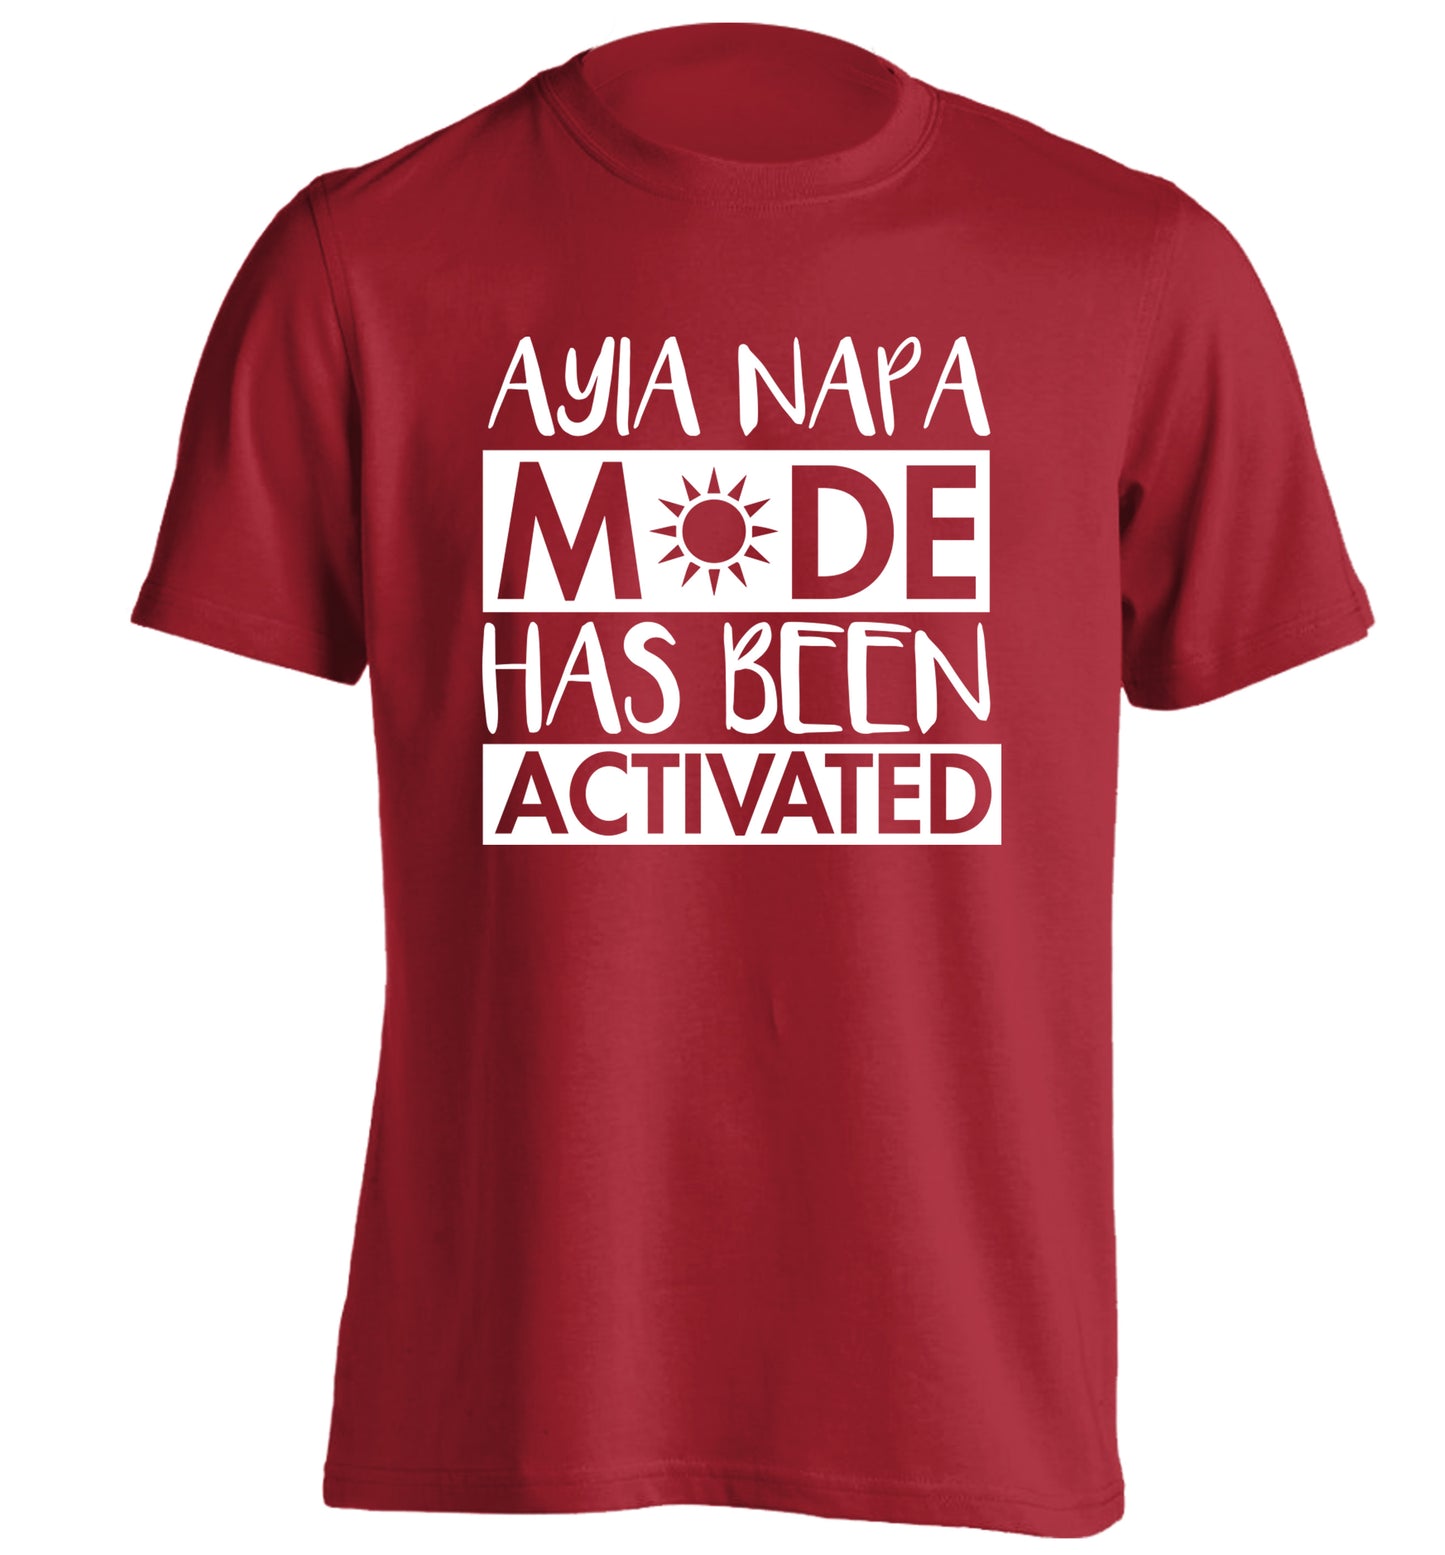 Ayia Napa mode has been activated adults unisex red Tshirt 2XL